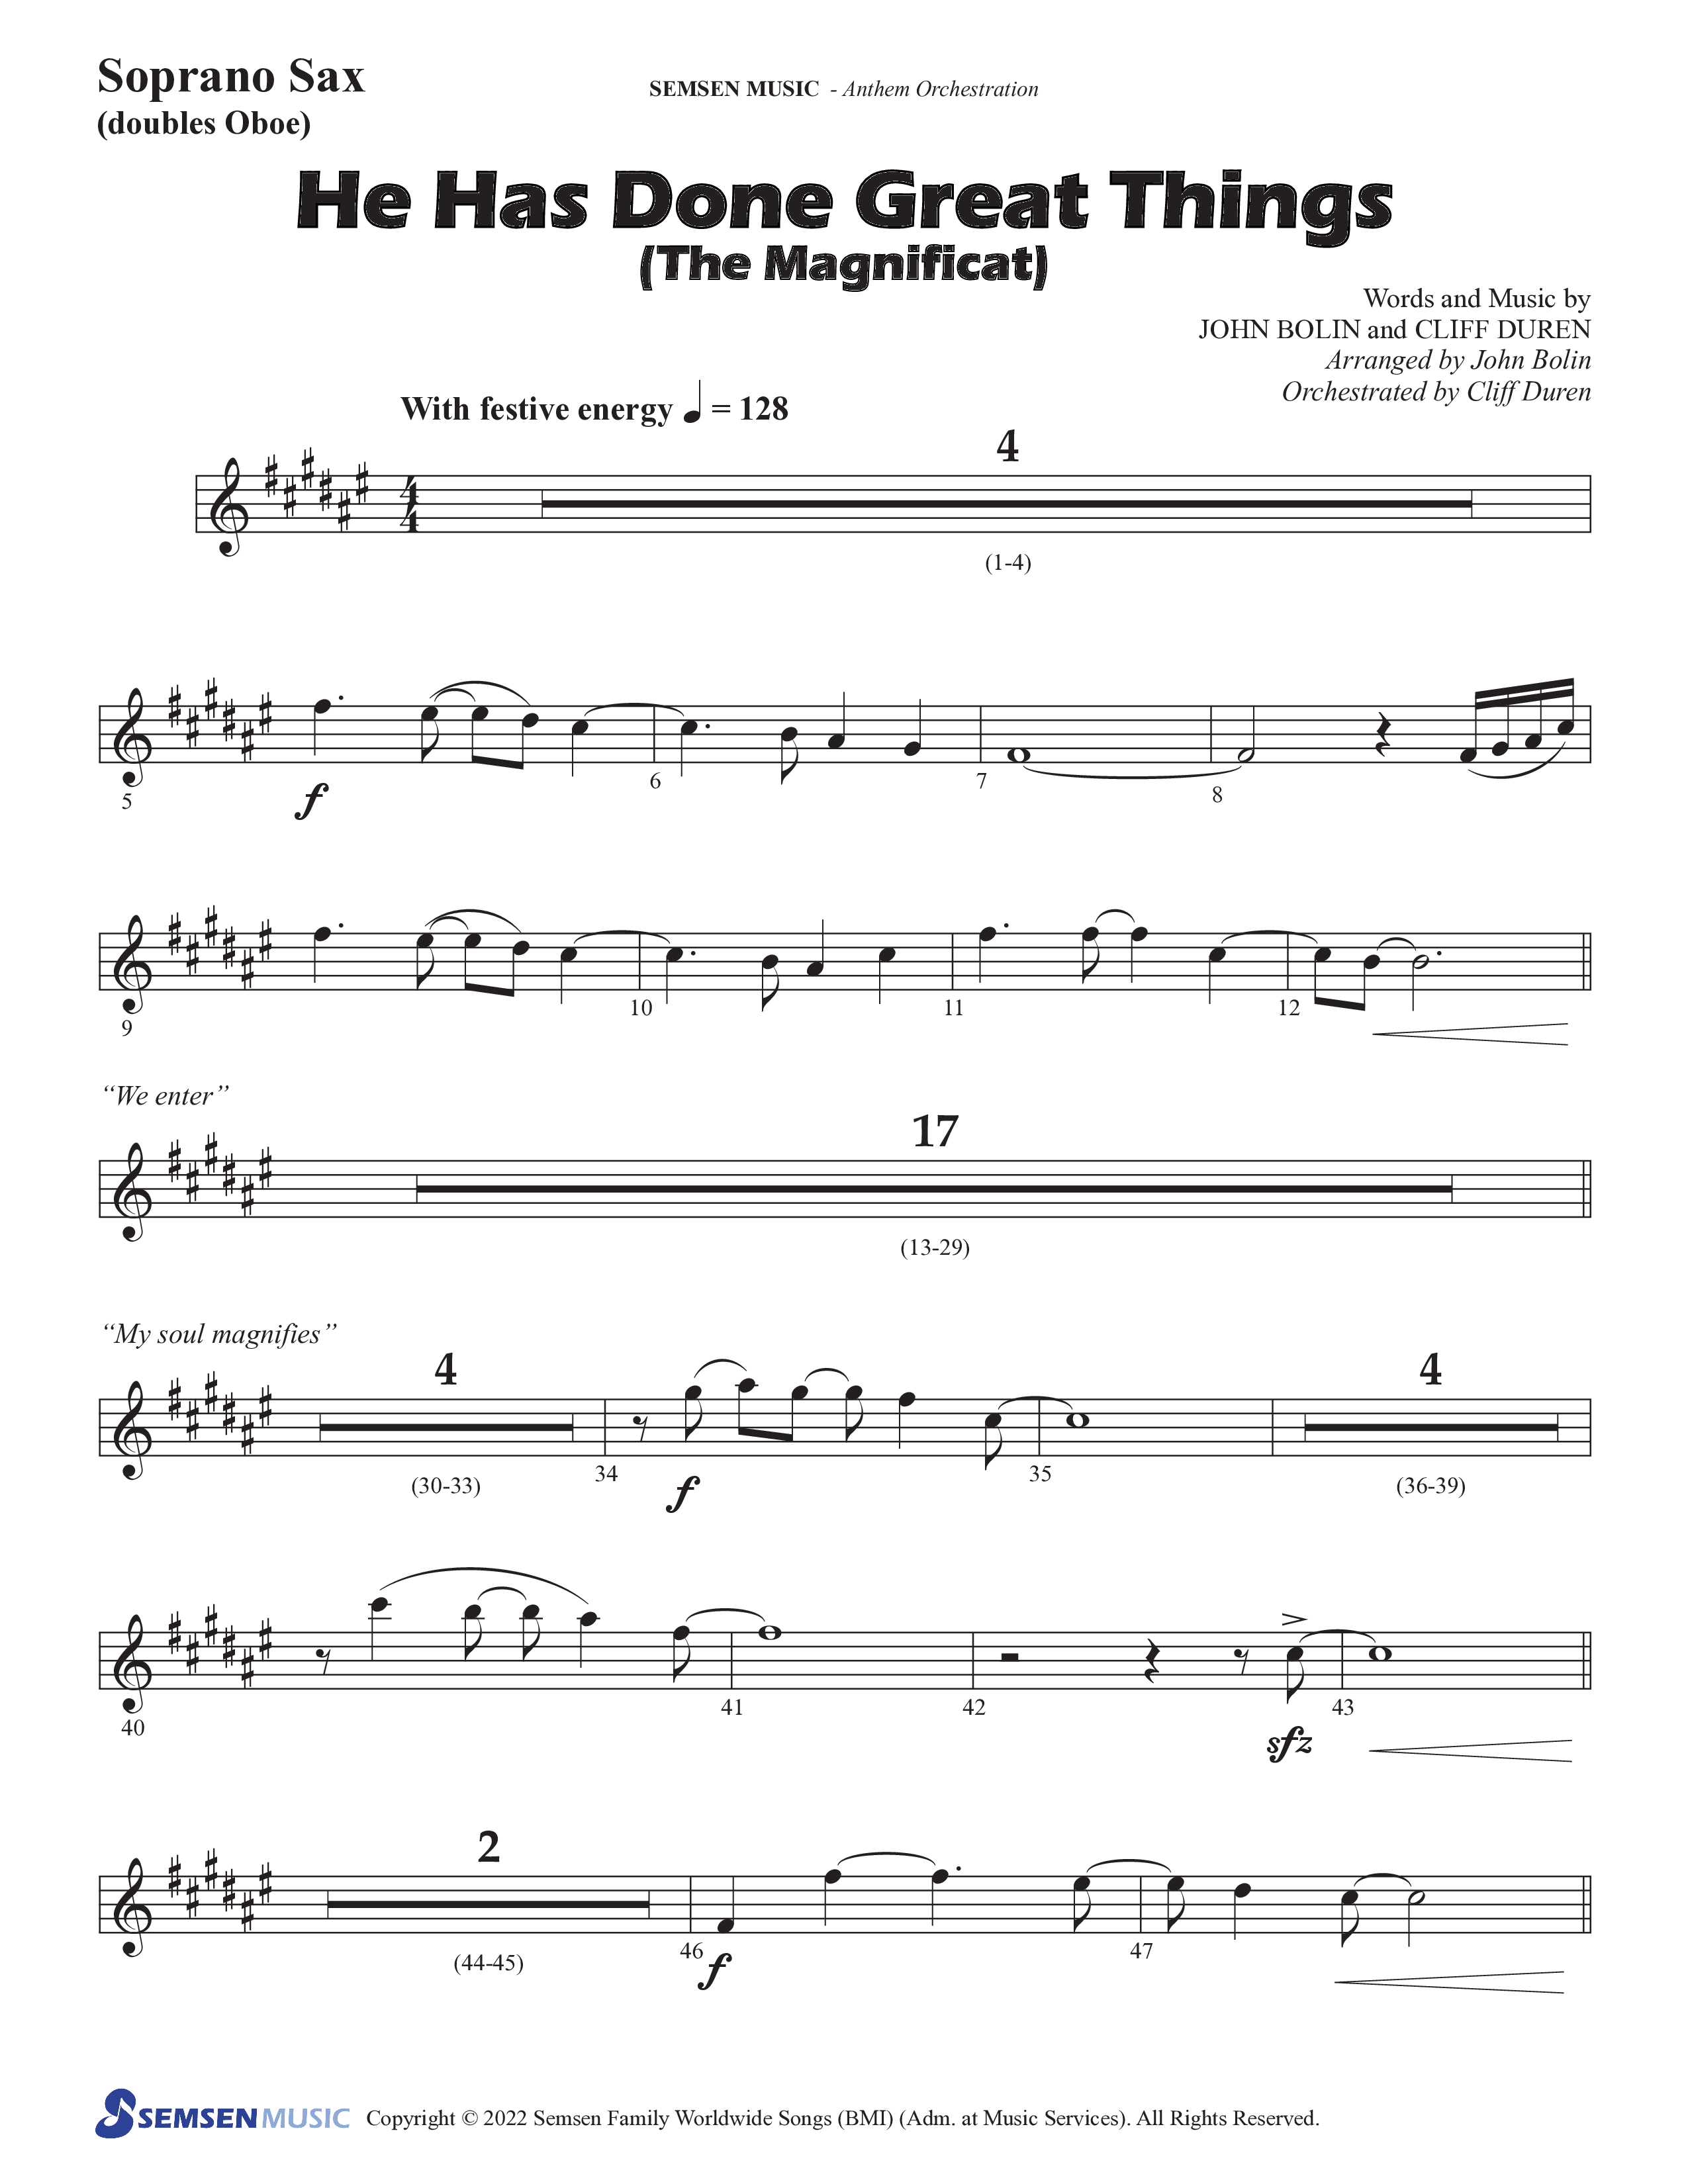 He Has Done Great Things (The Magnificat) (Choral Anthem SATB) Soprano Sax (Semsen Music / Arr. John Bolin / Orch. Cliff Duren)